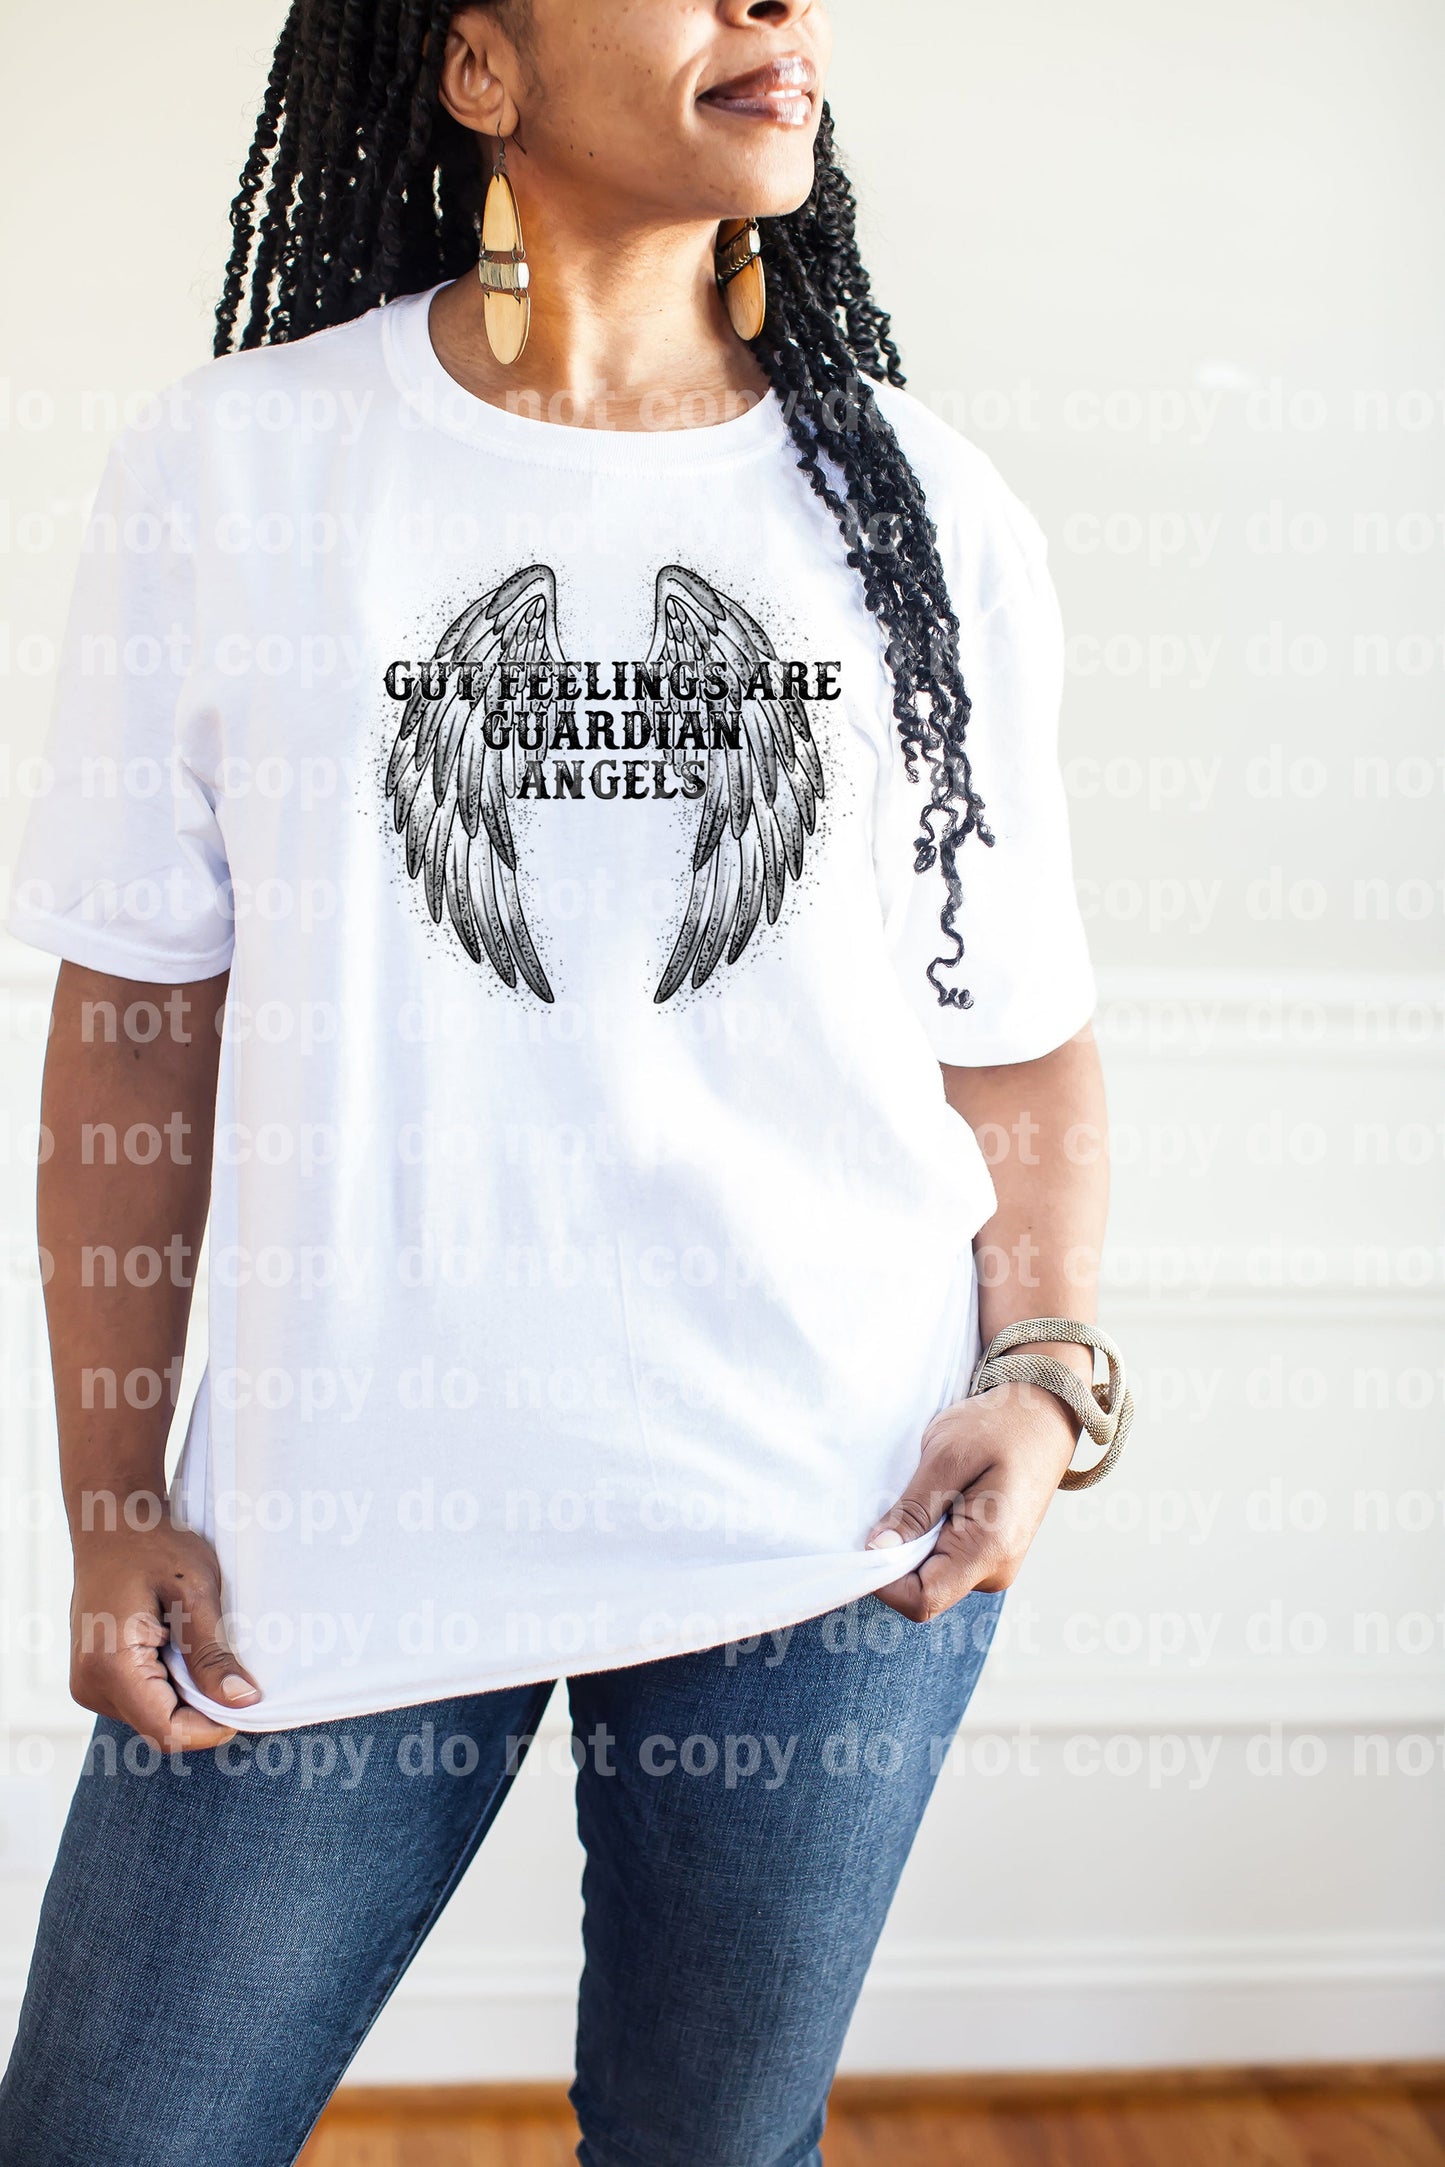 Gut Feelings Are Guardian Angels Dream Print or Sublimation Print